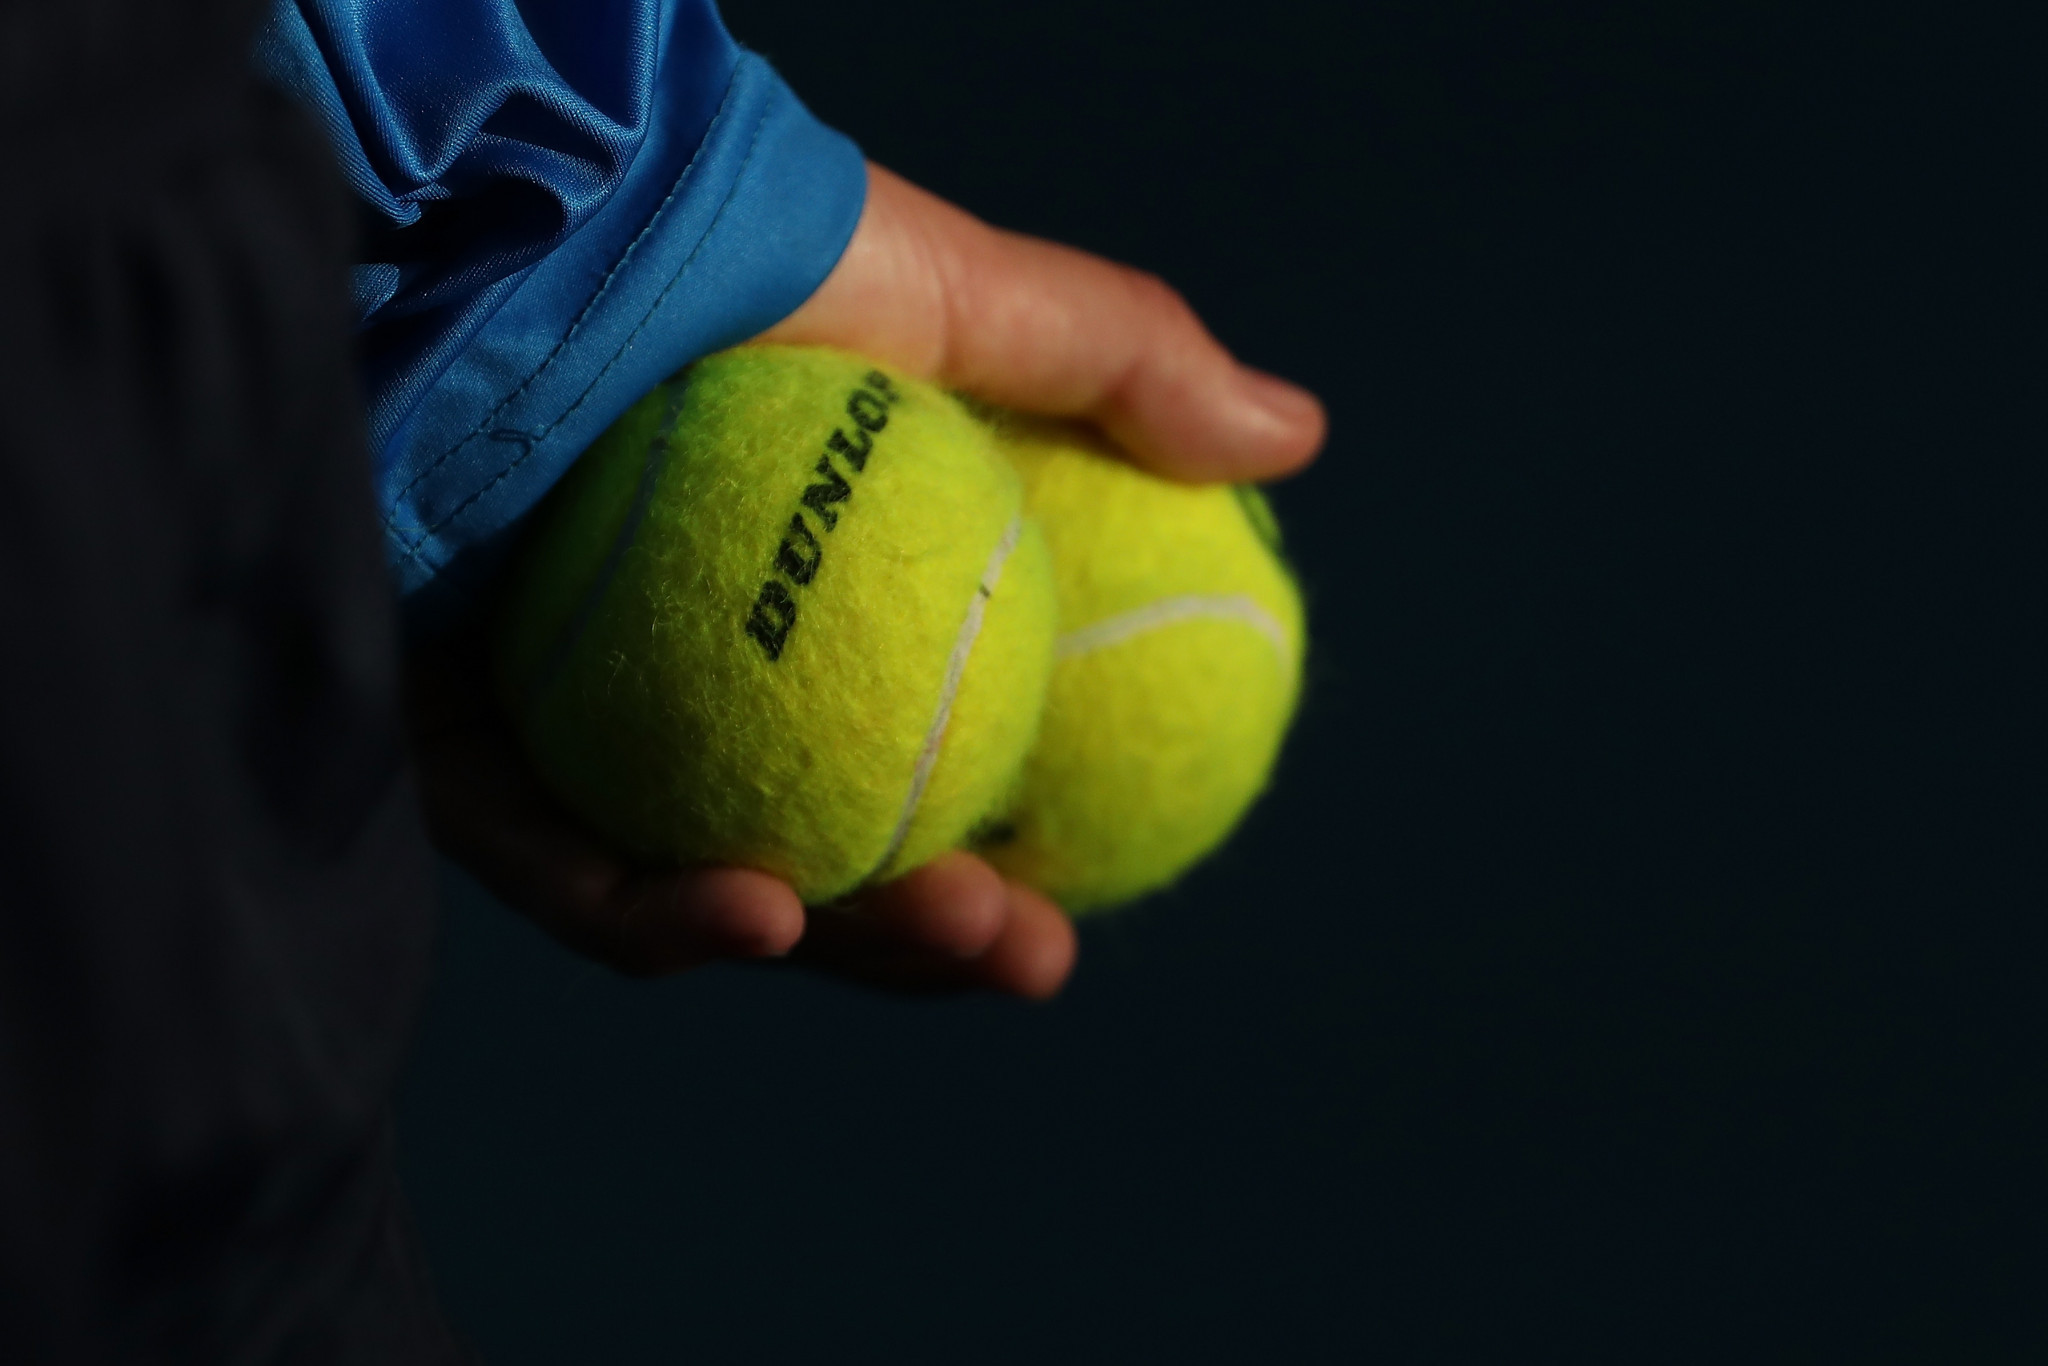 Dunlop announced as tennis ball supplier for Paris 2024 Olympics and Paralympics